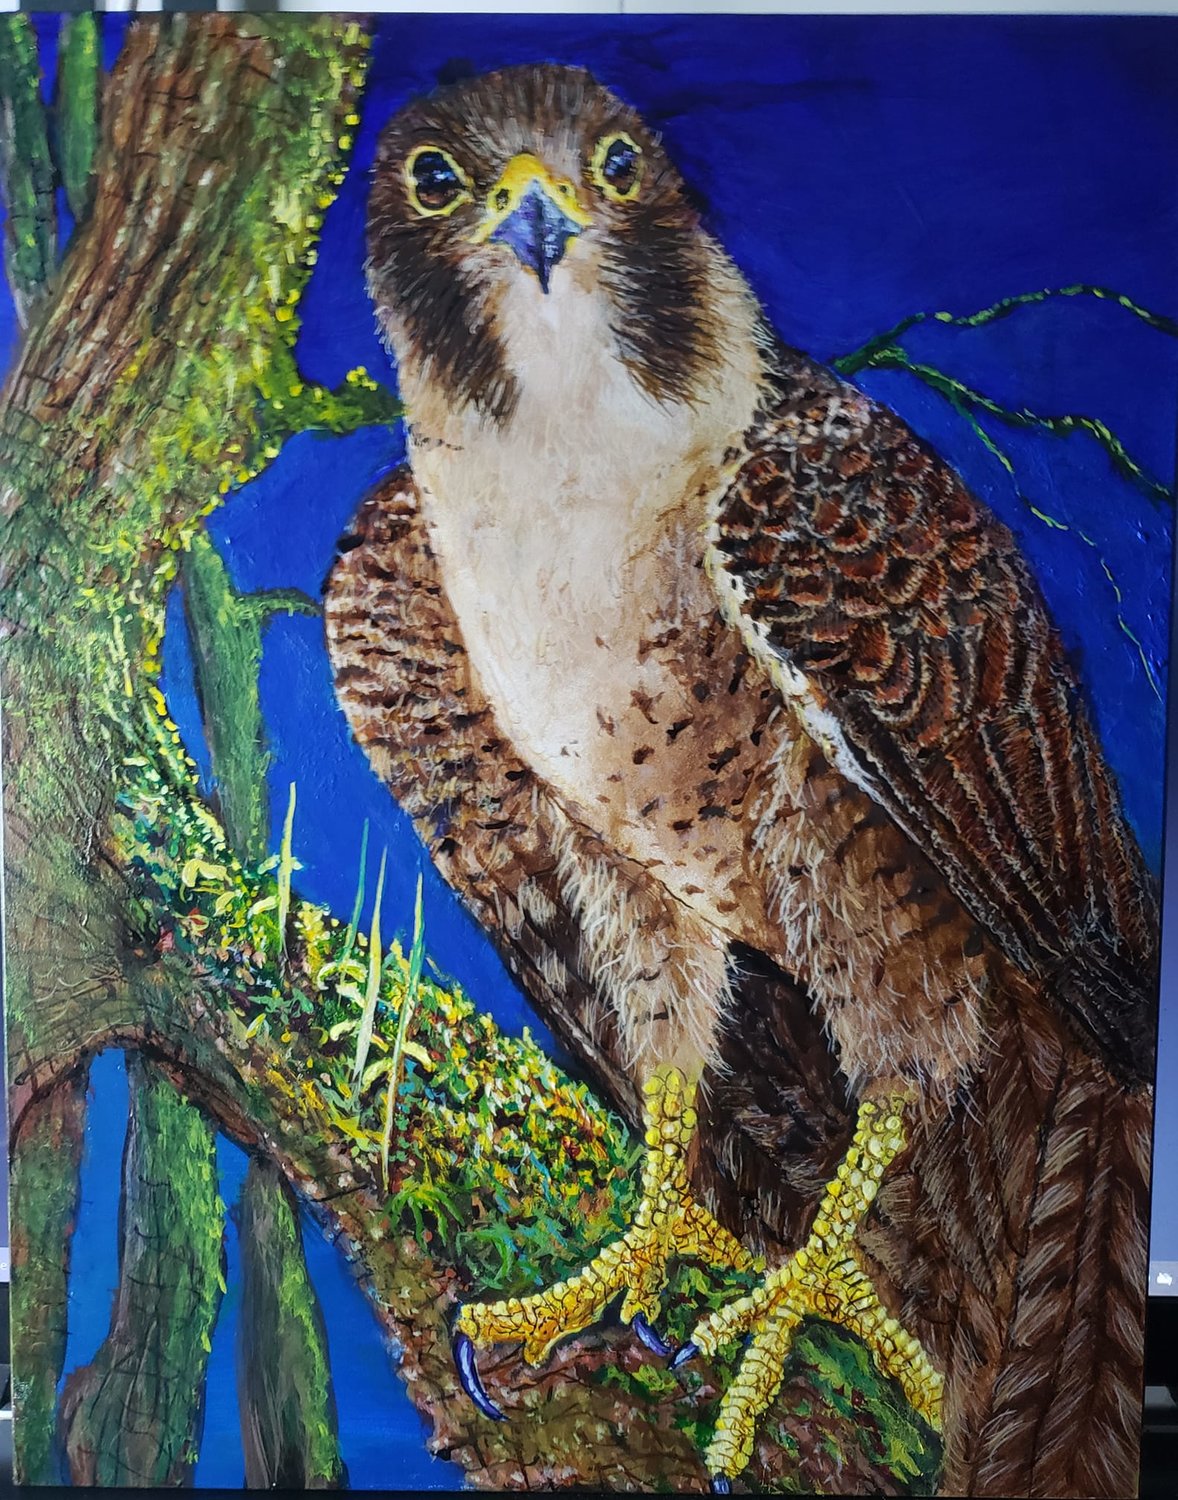 David Joyner's favorite subjects are animals from the Serengeti, but he loves painting other animals too.